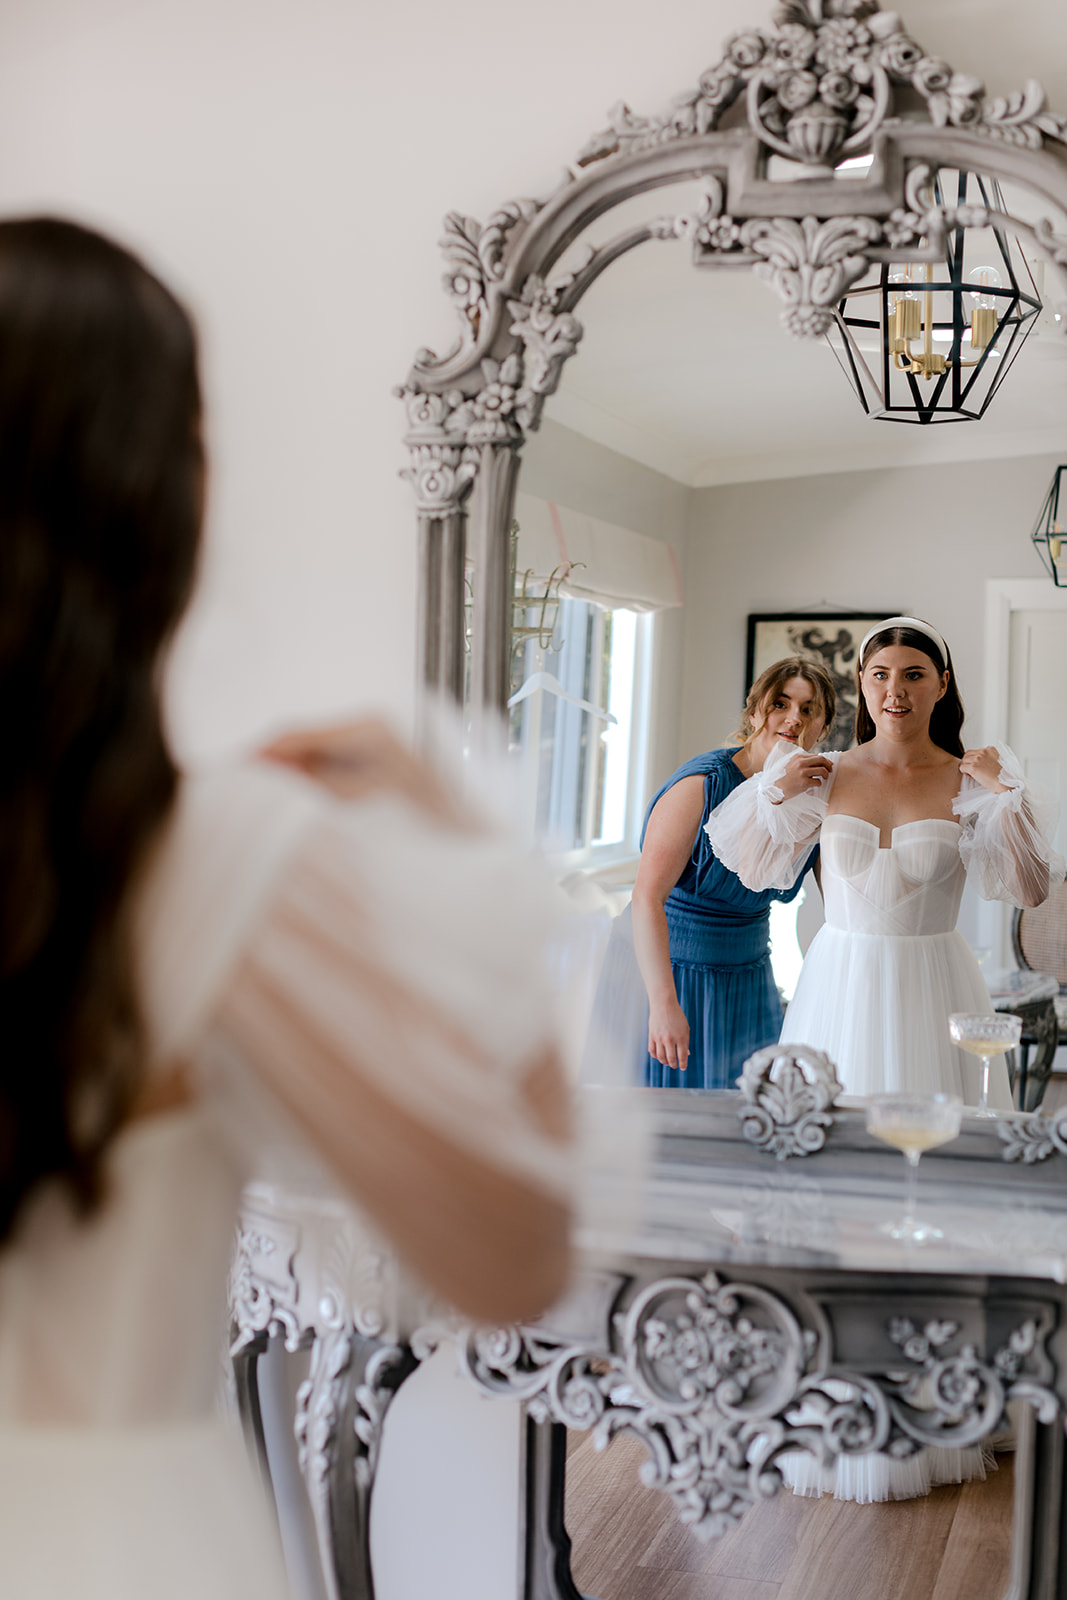 Bridesmaids helping bride get ready for her elegant country wedding.